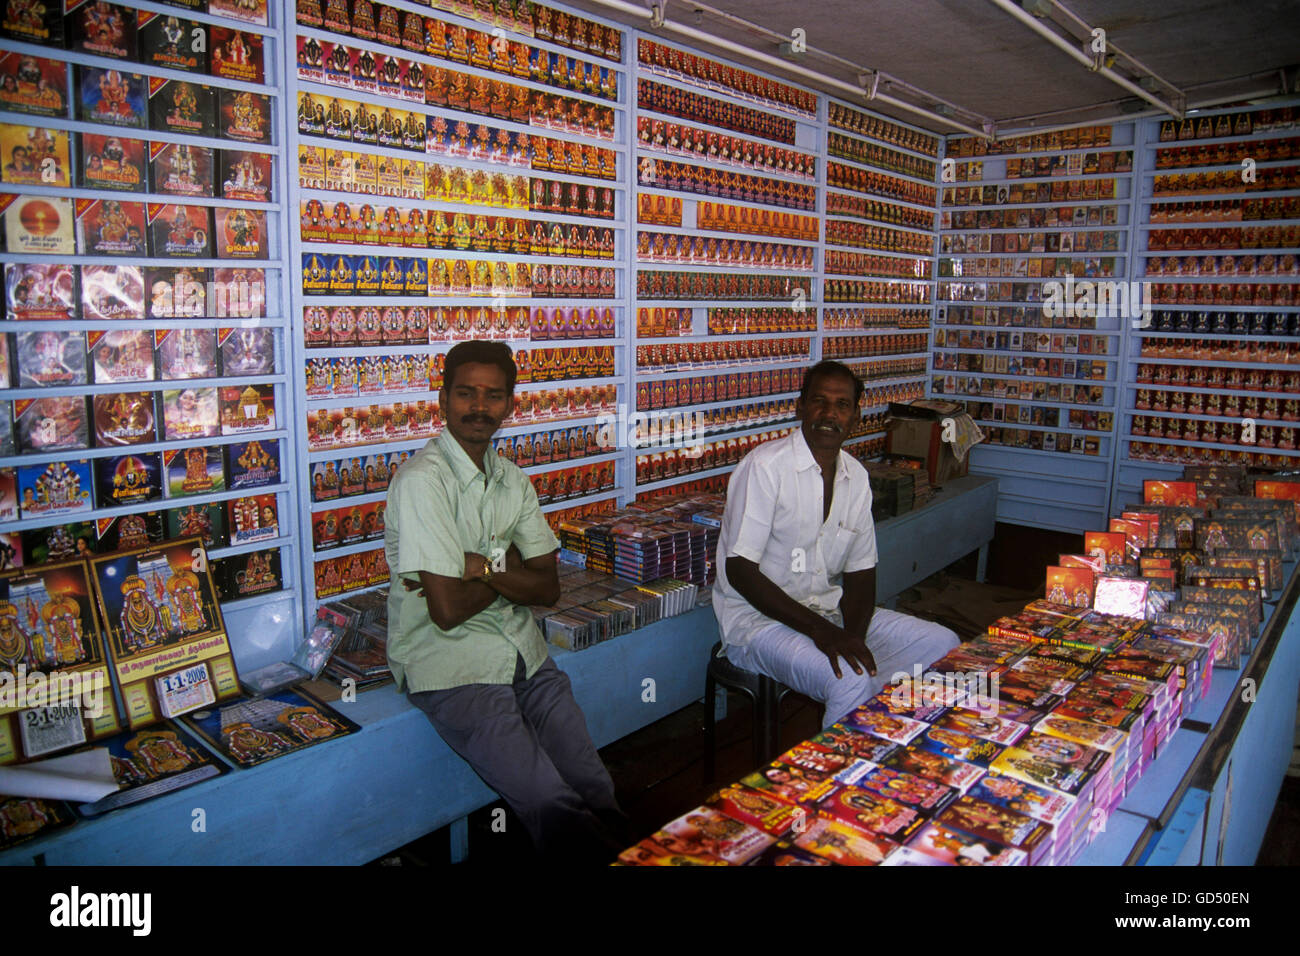 Sale Of Cd's Cassettes Of Holy Songs Outside Temple , Tamil Nadu , India Stock Photo